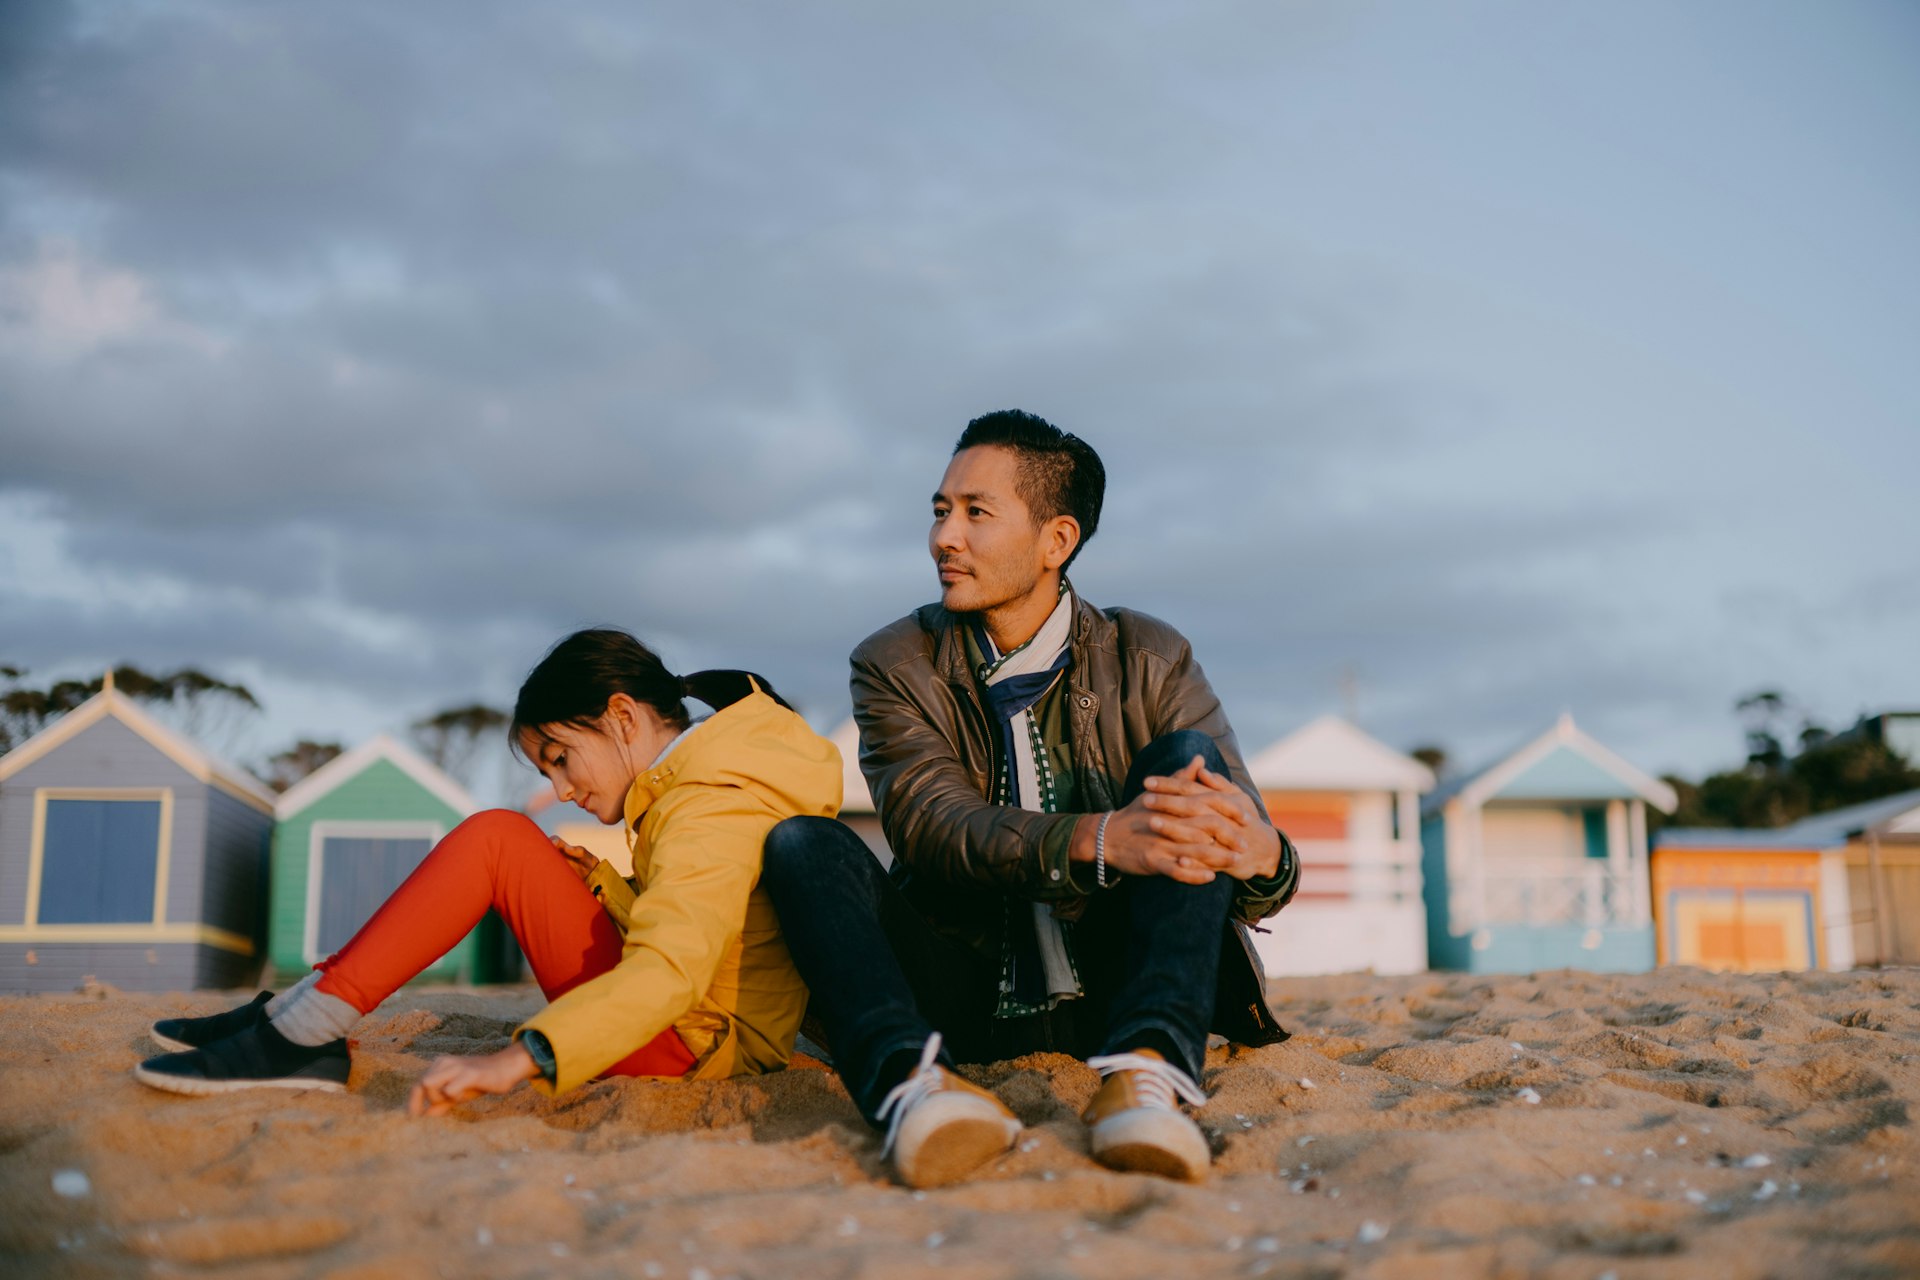 A father and daughter sitting on the beach together in Melbourne with colorful beach huts in the background